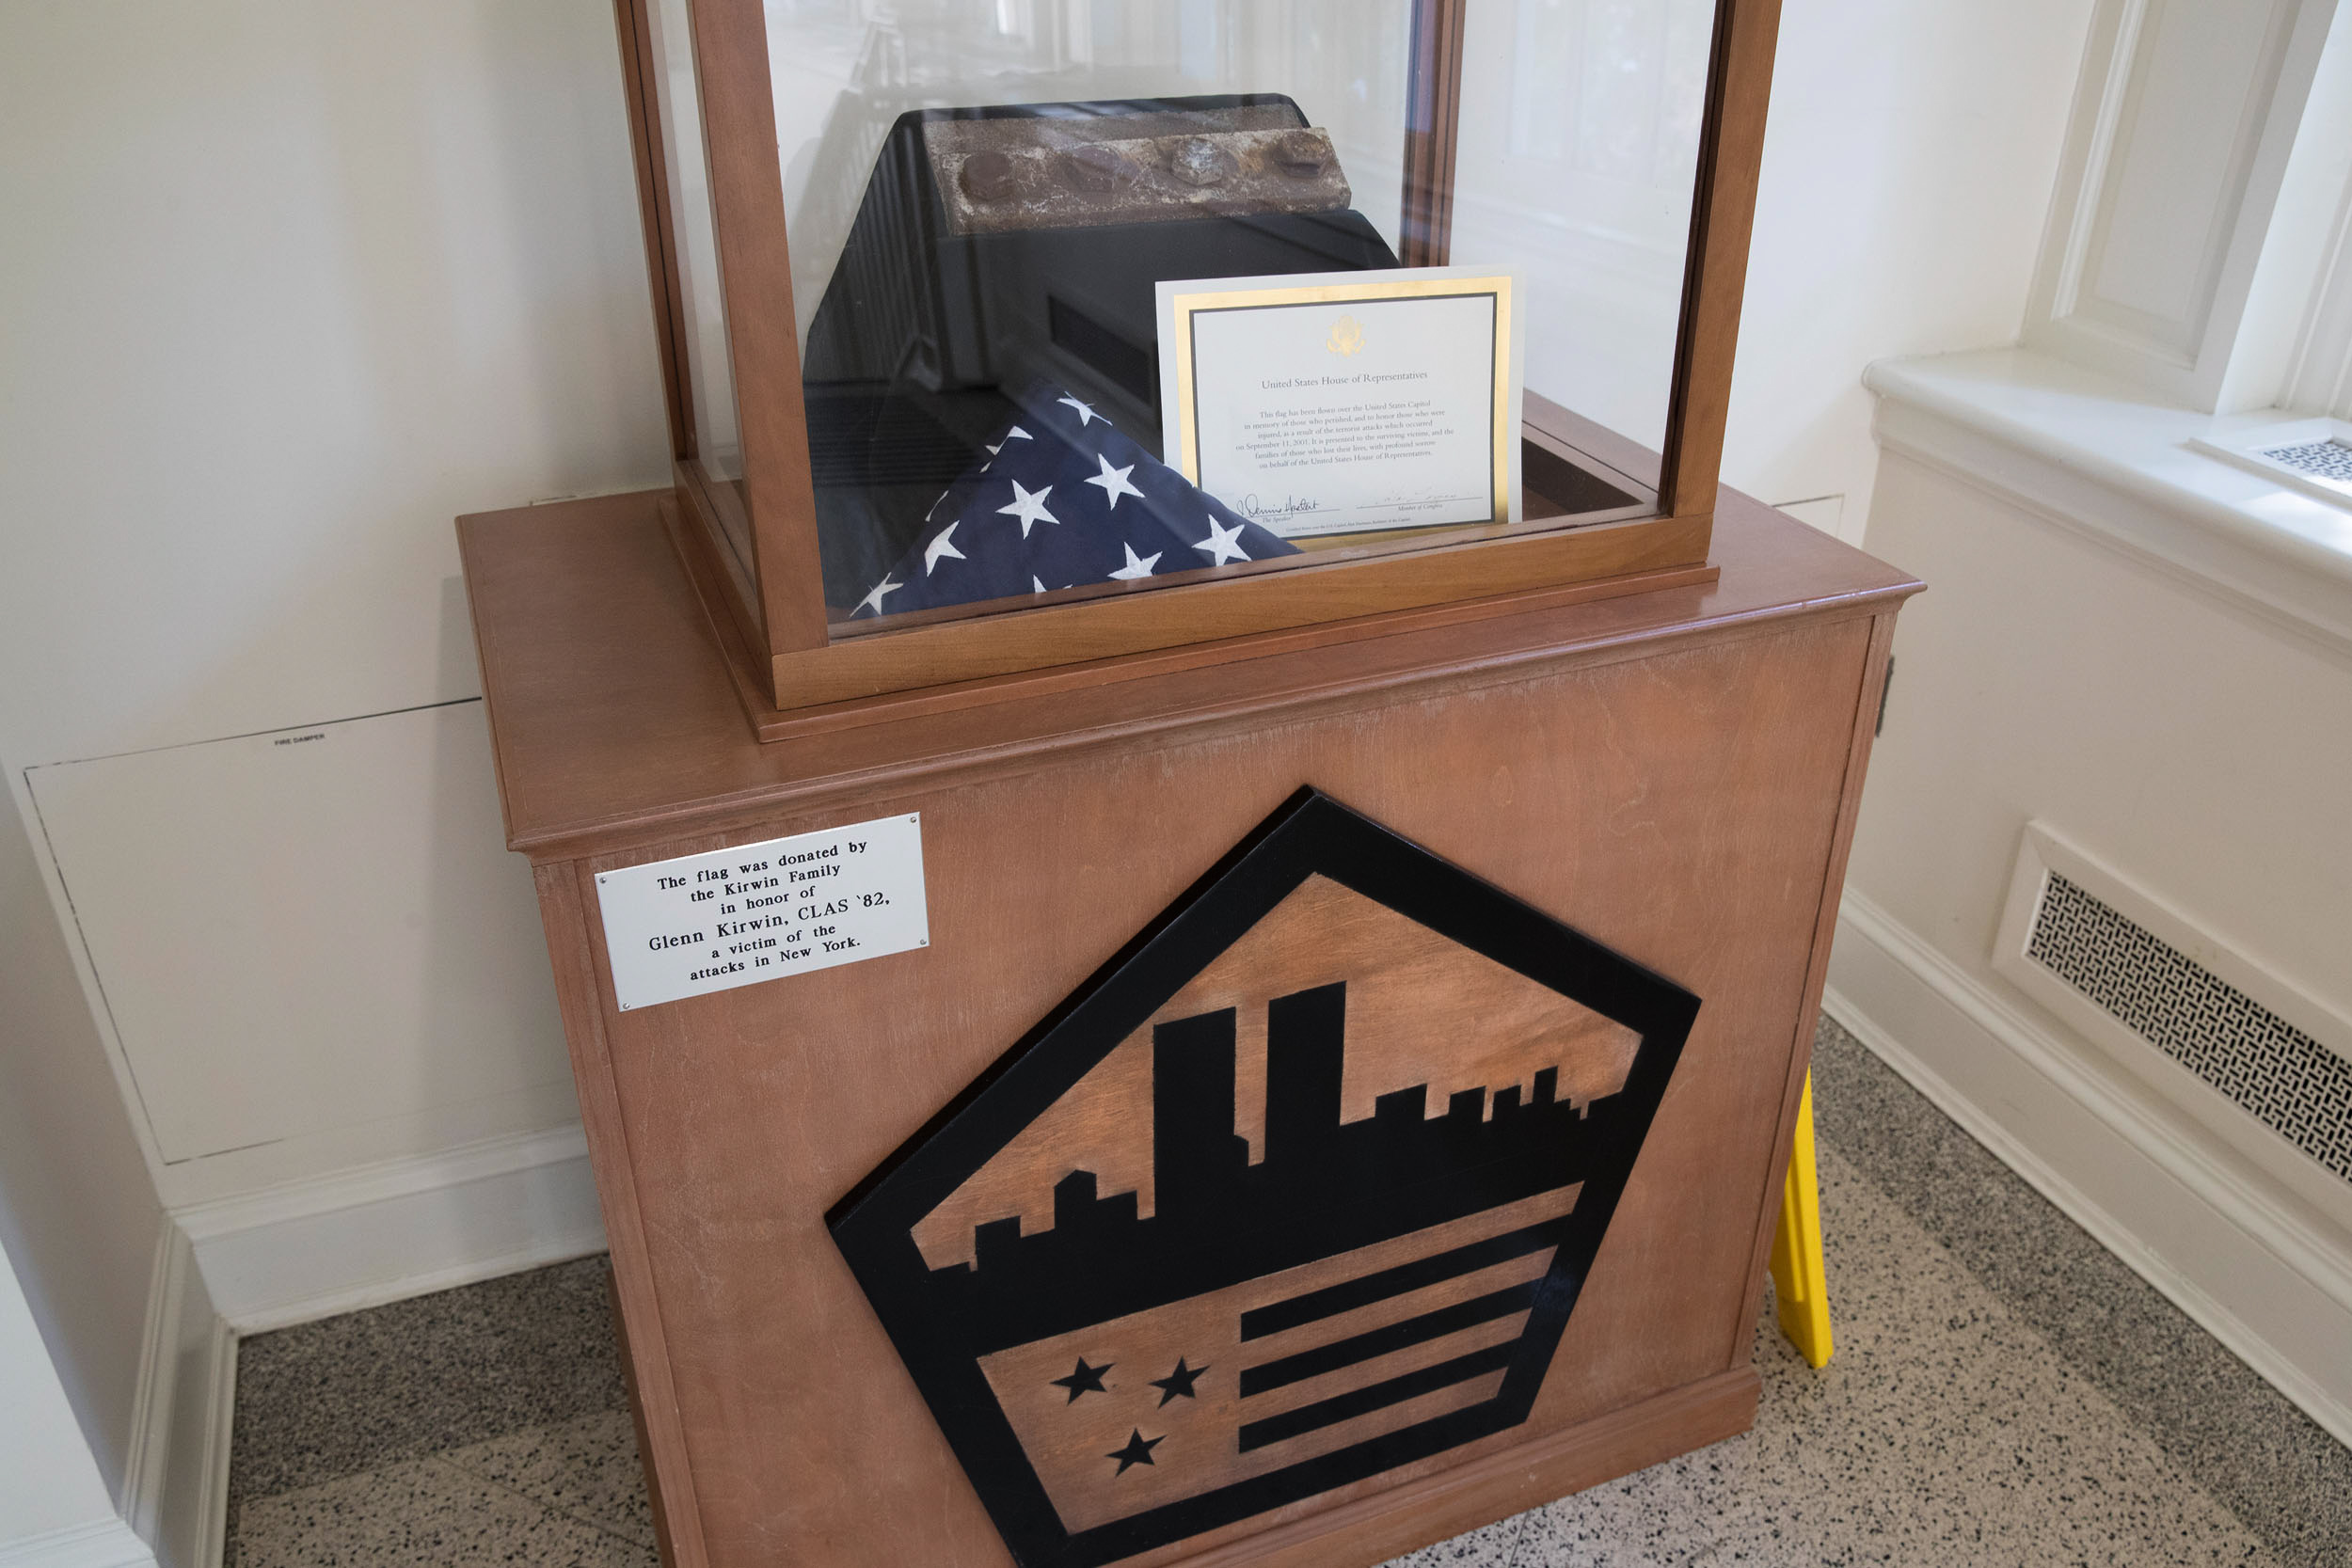 American flag and a piece of steel in a glass box